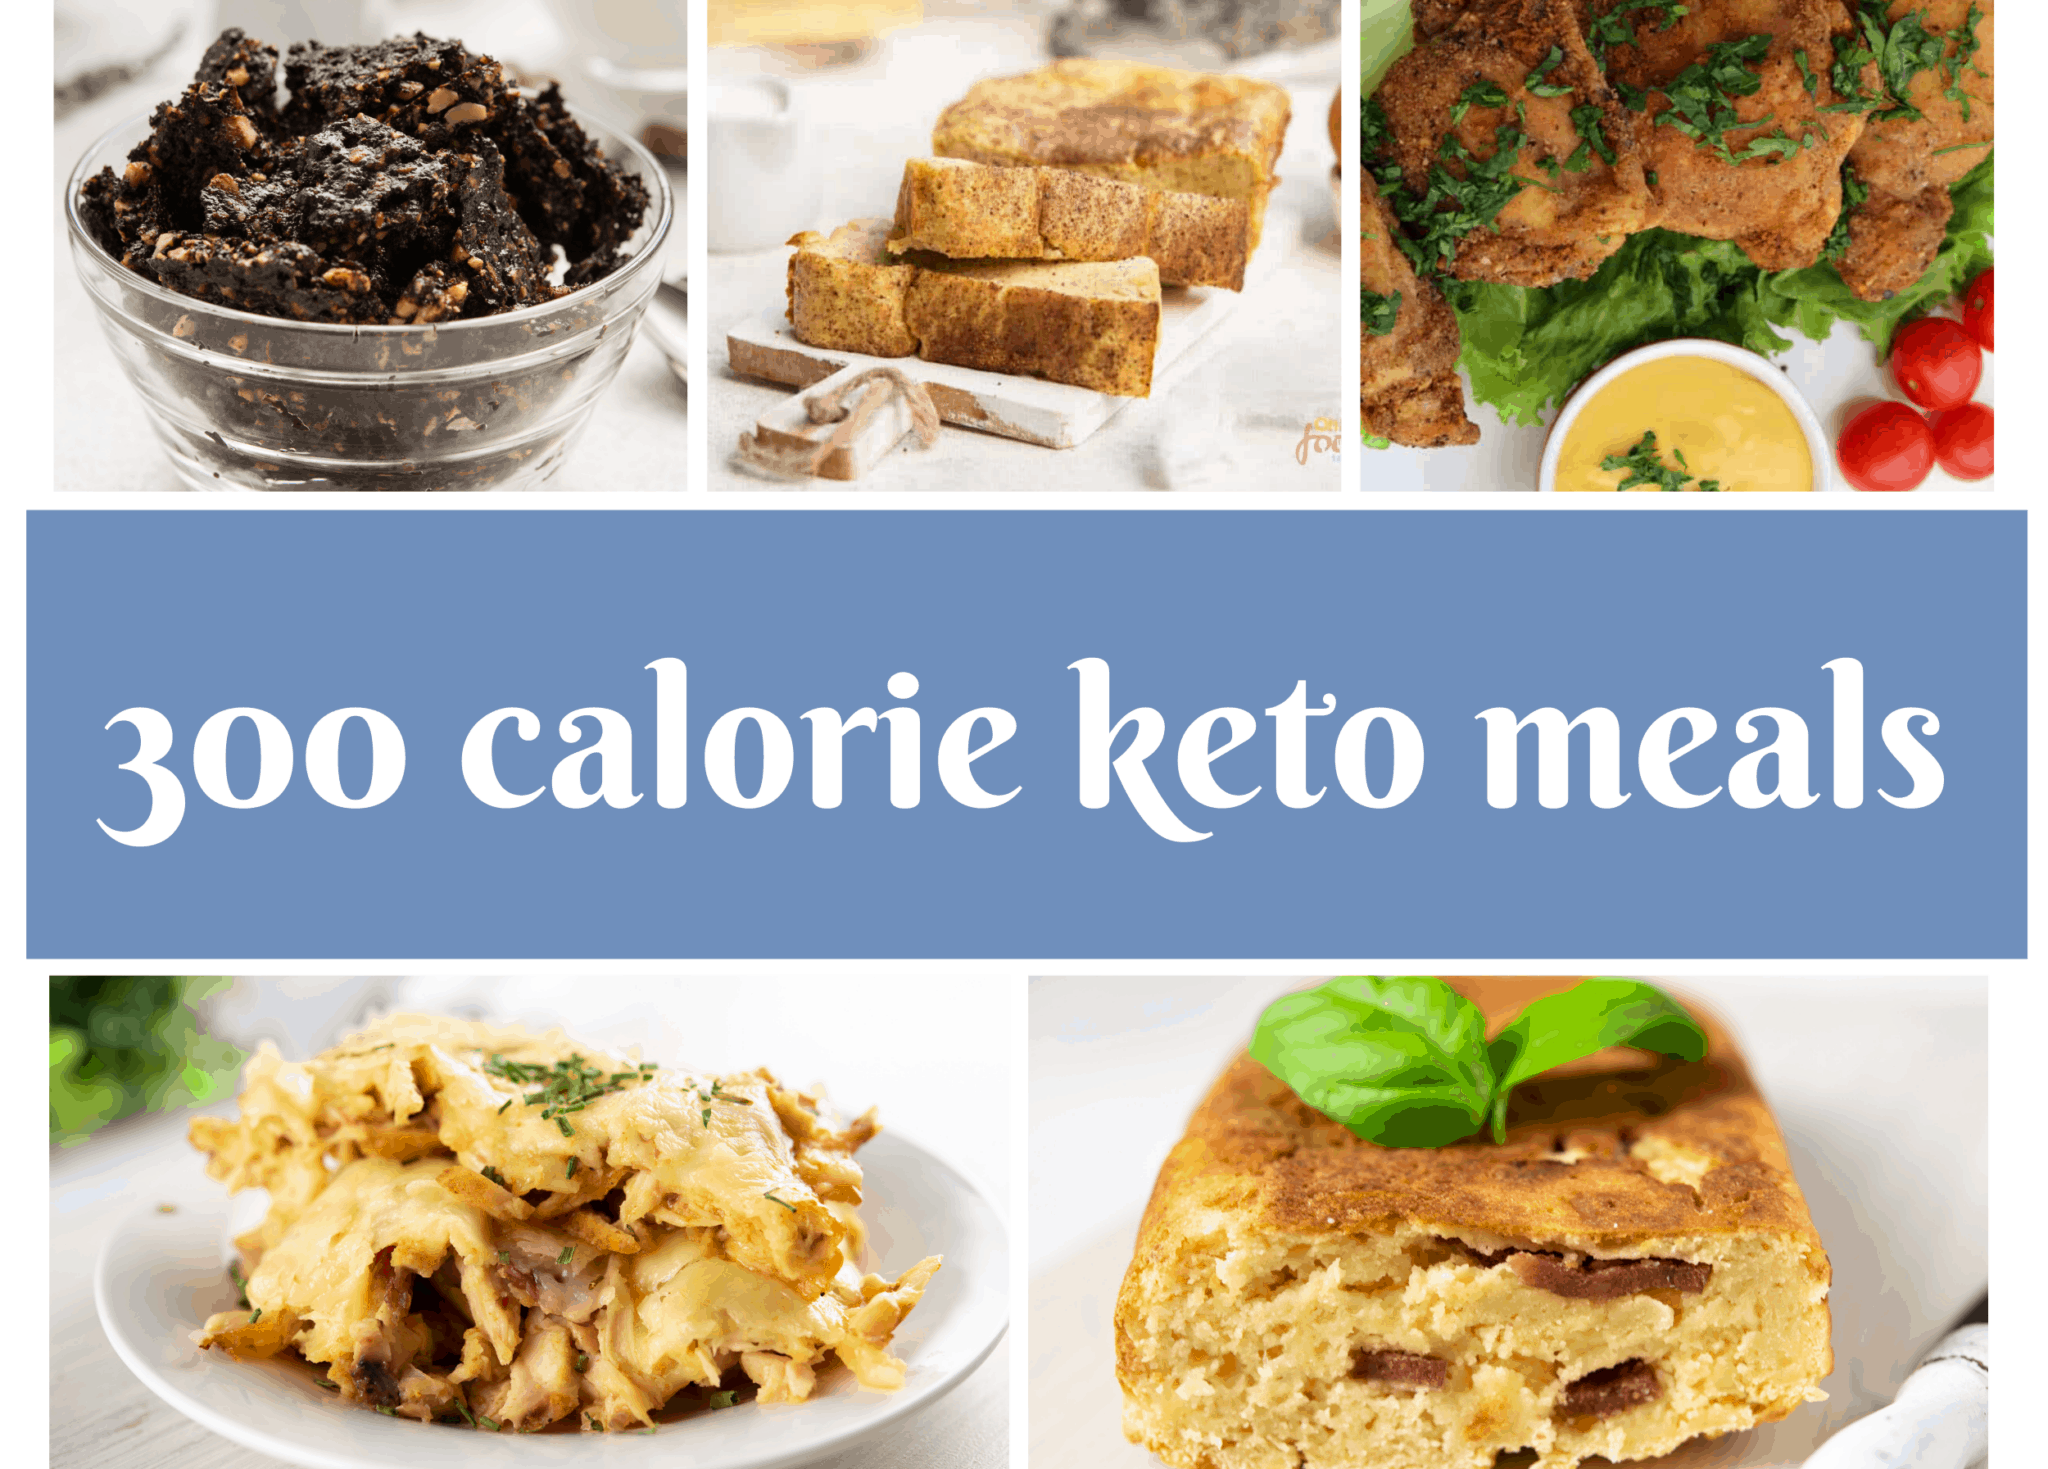 19 Easy 300 Calorie Keto Meals - Oh So Foodie